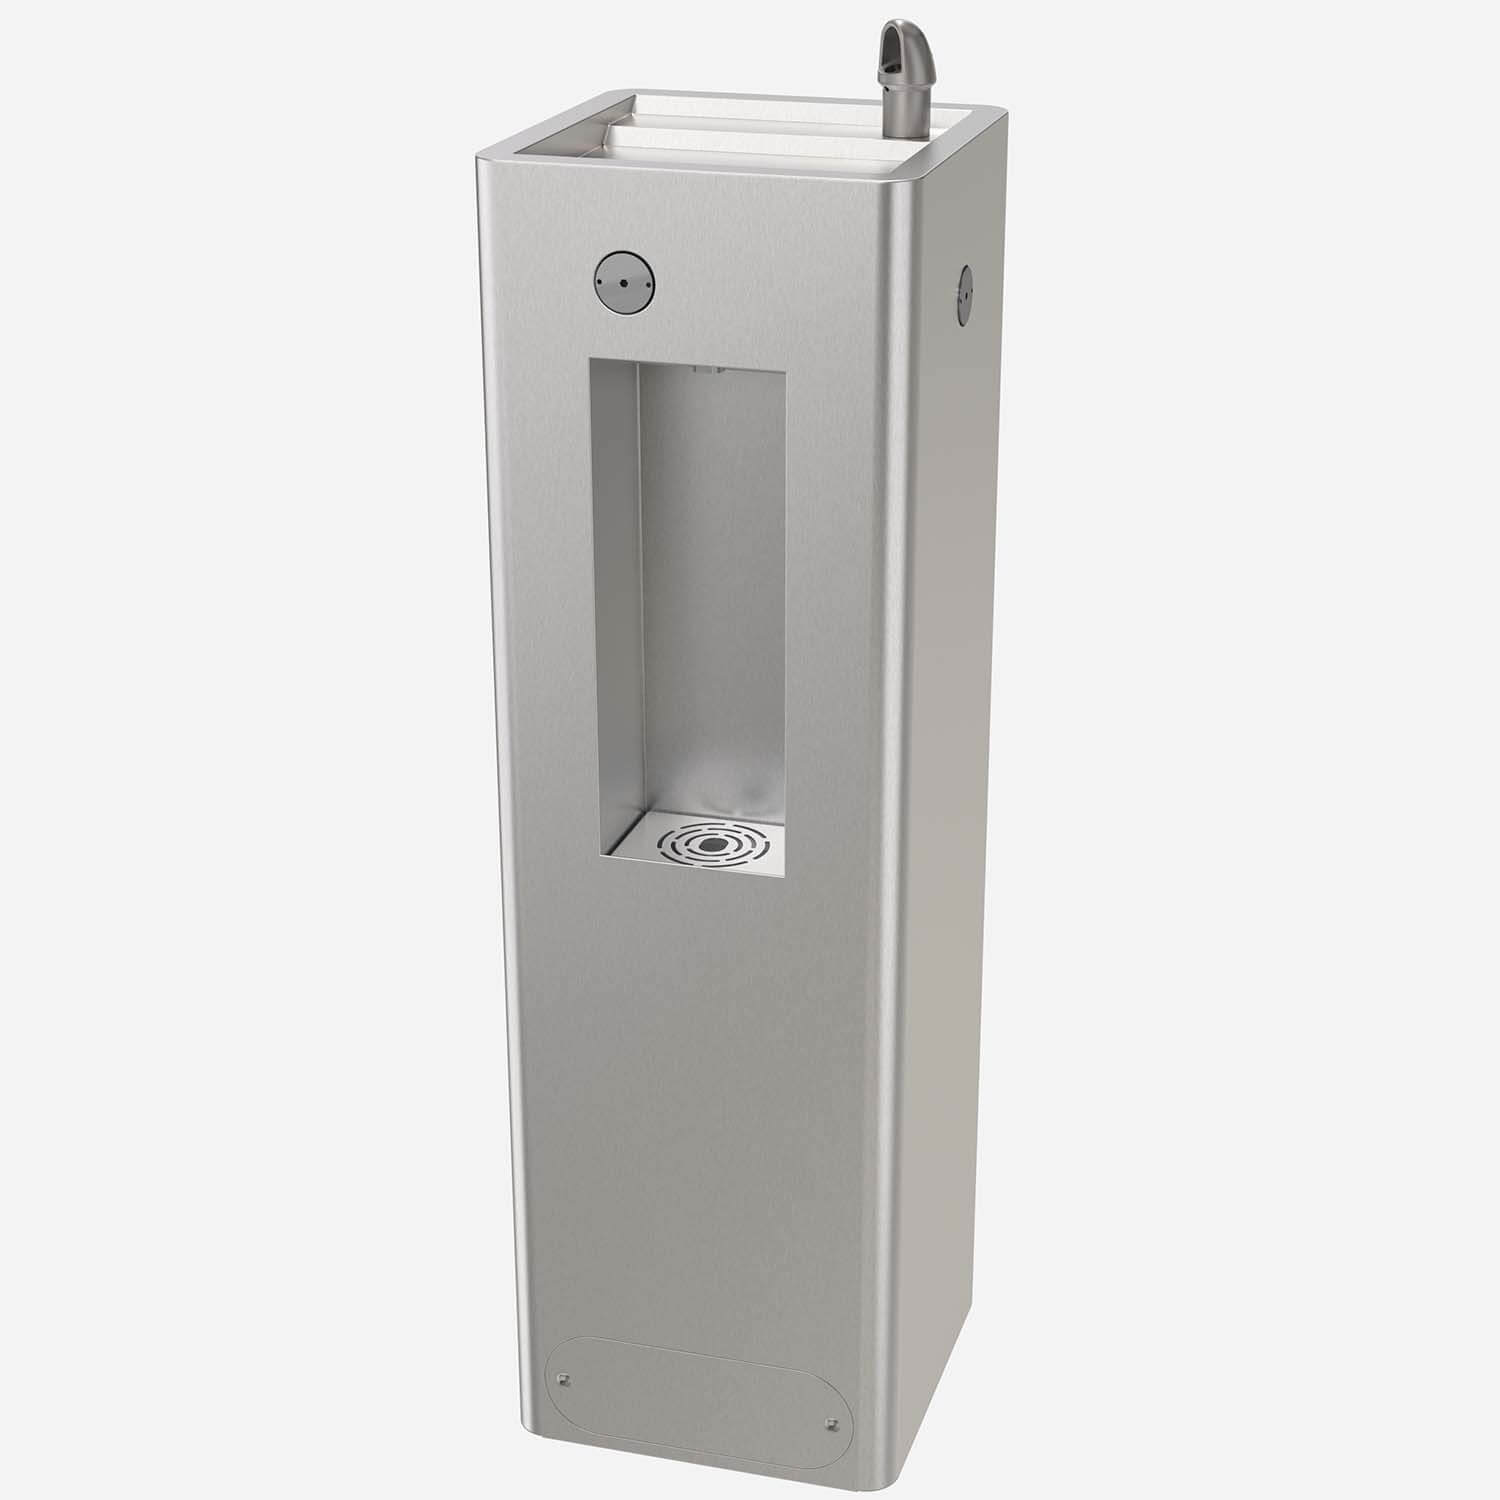 Push button Drinking Fountains & Accessories at